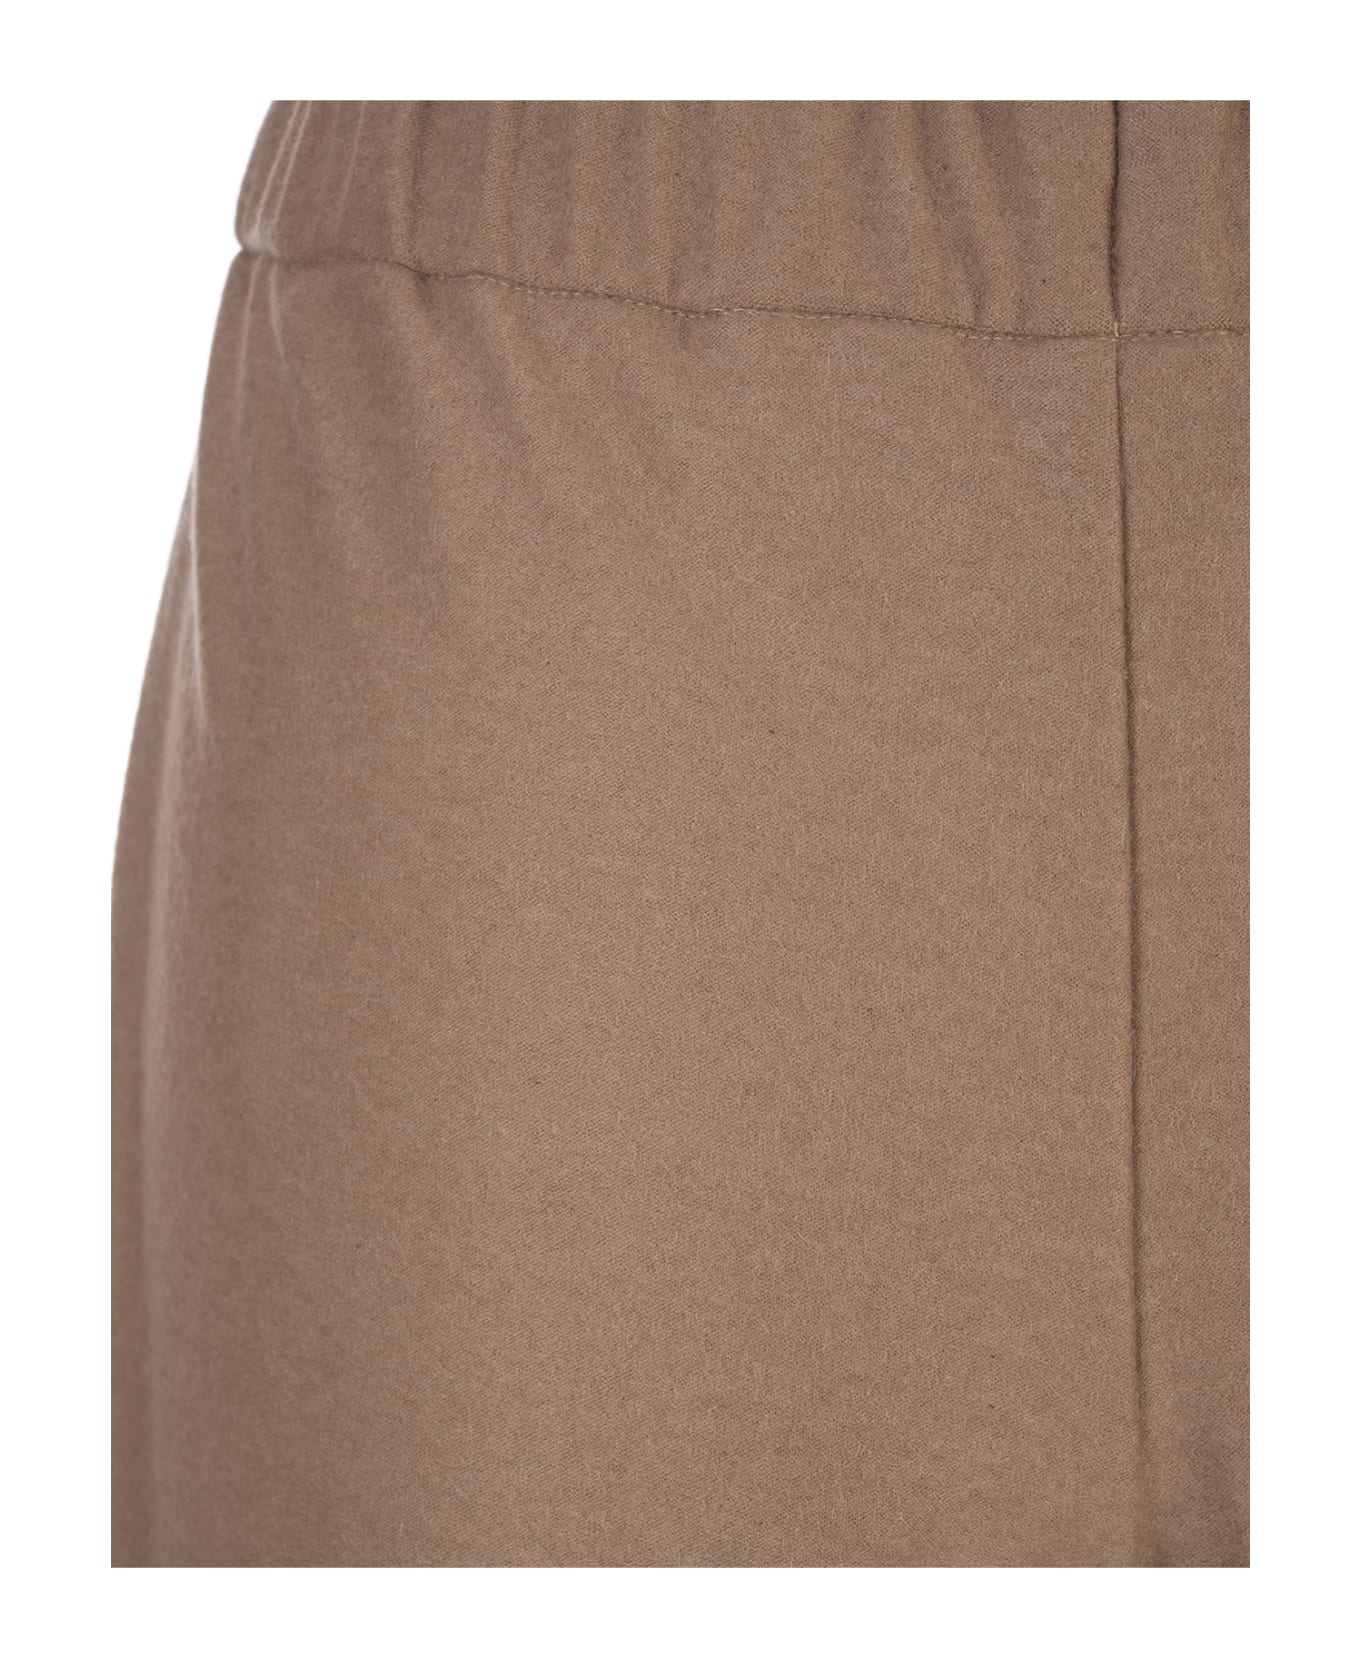 Fedeli Camel Cashmere Wide Trousers - Brown